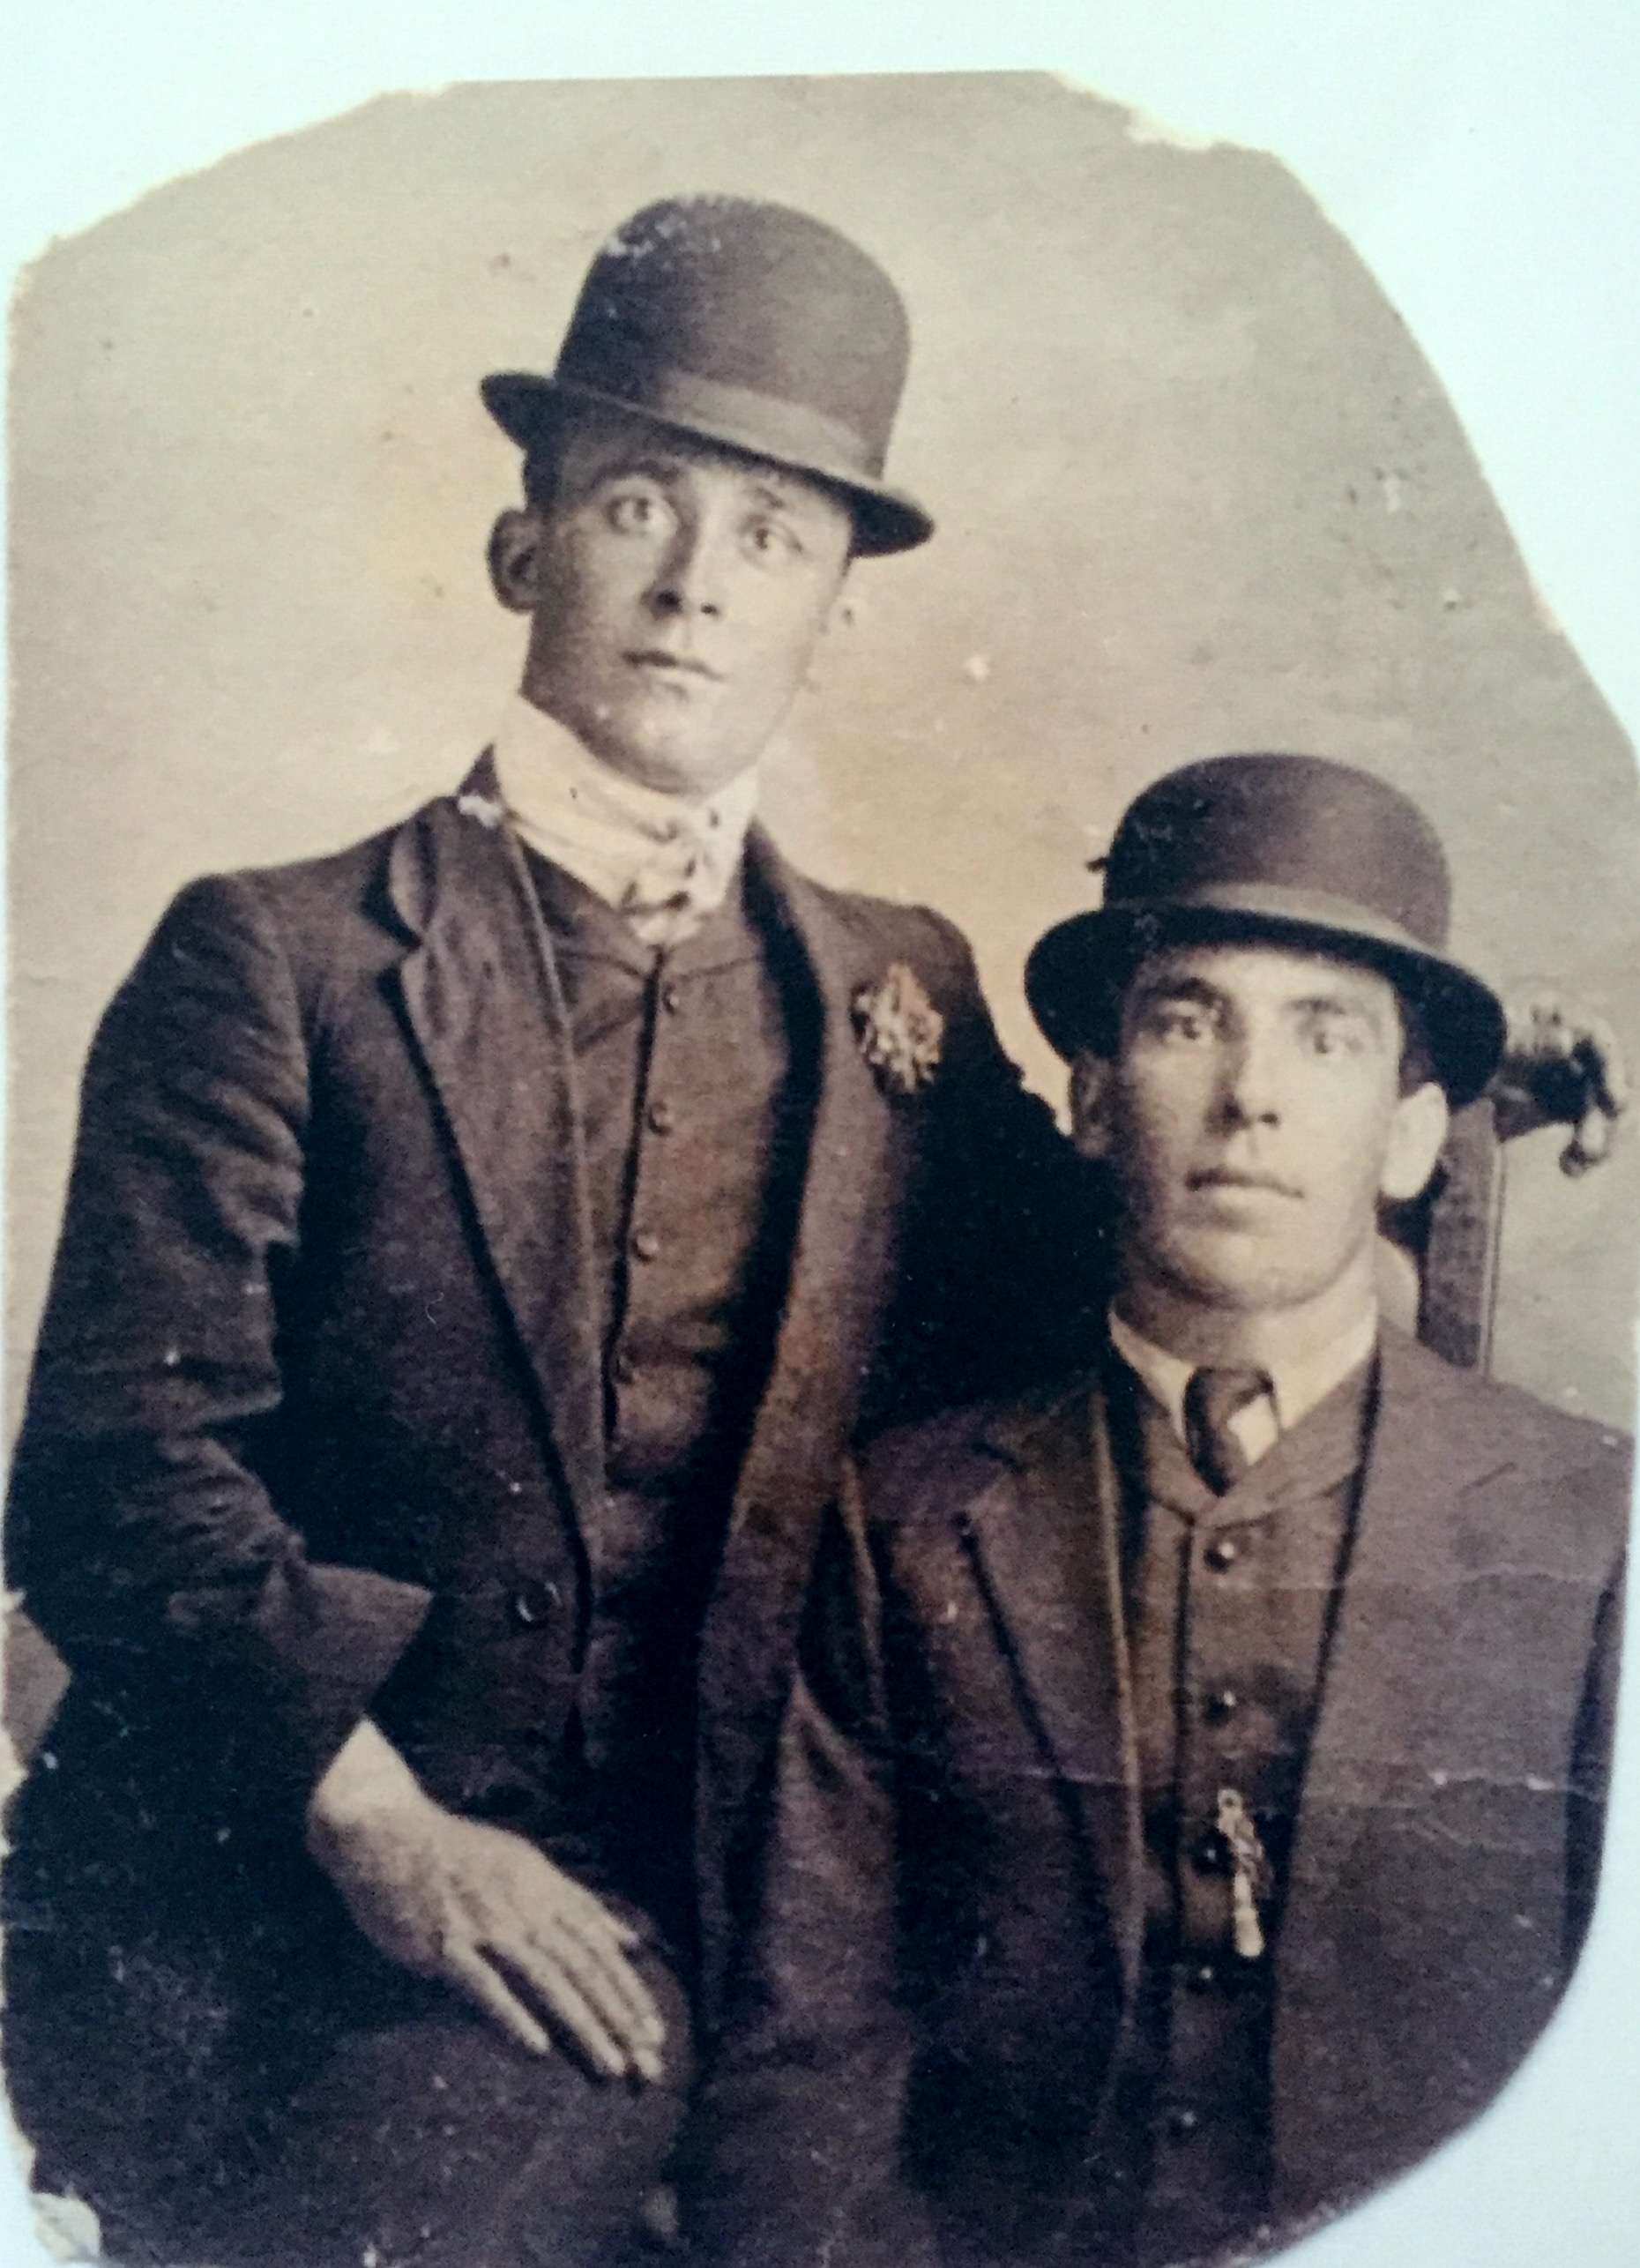 My grandfather, George Rueben Hawkes, (seated)he was born in Christchurch New Zealand in 1884, came to Australia where he married my grandmother, had 10 children and died in 1924.